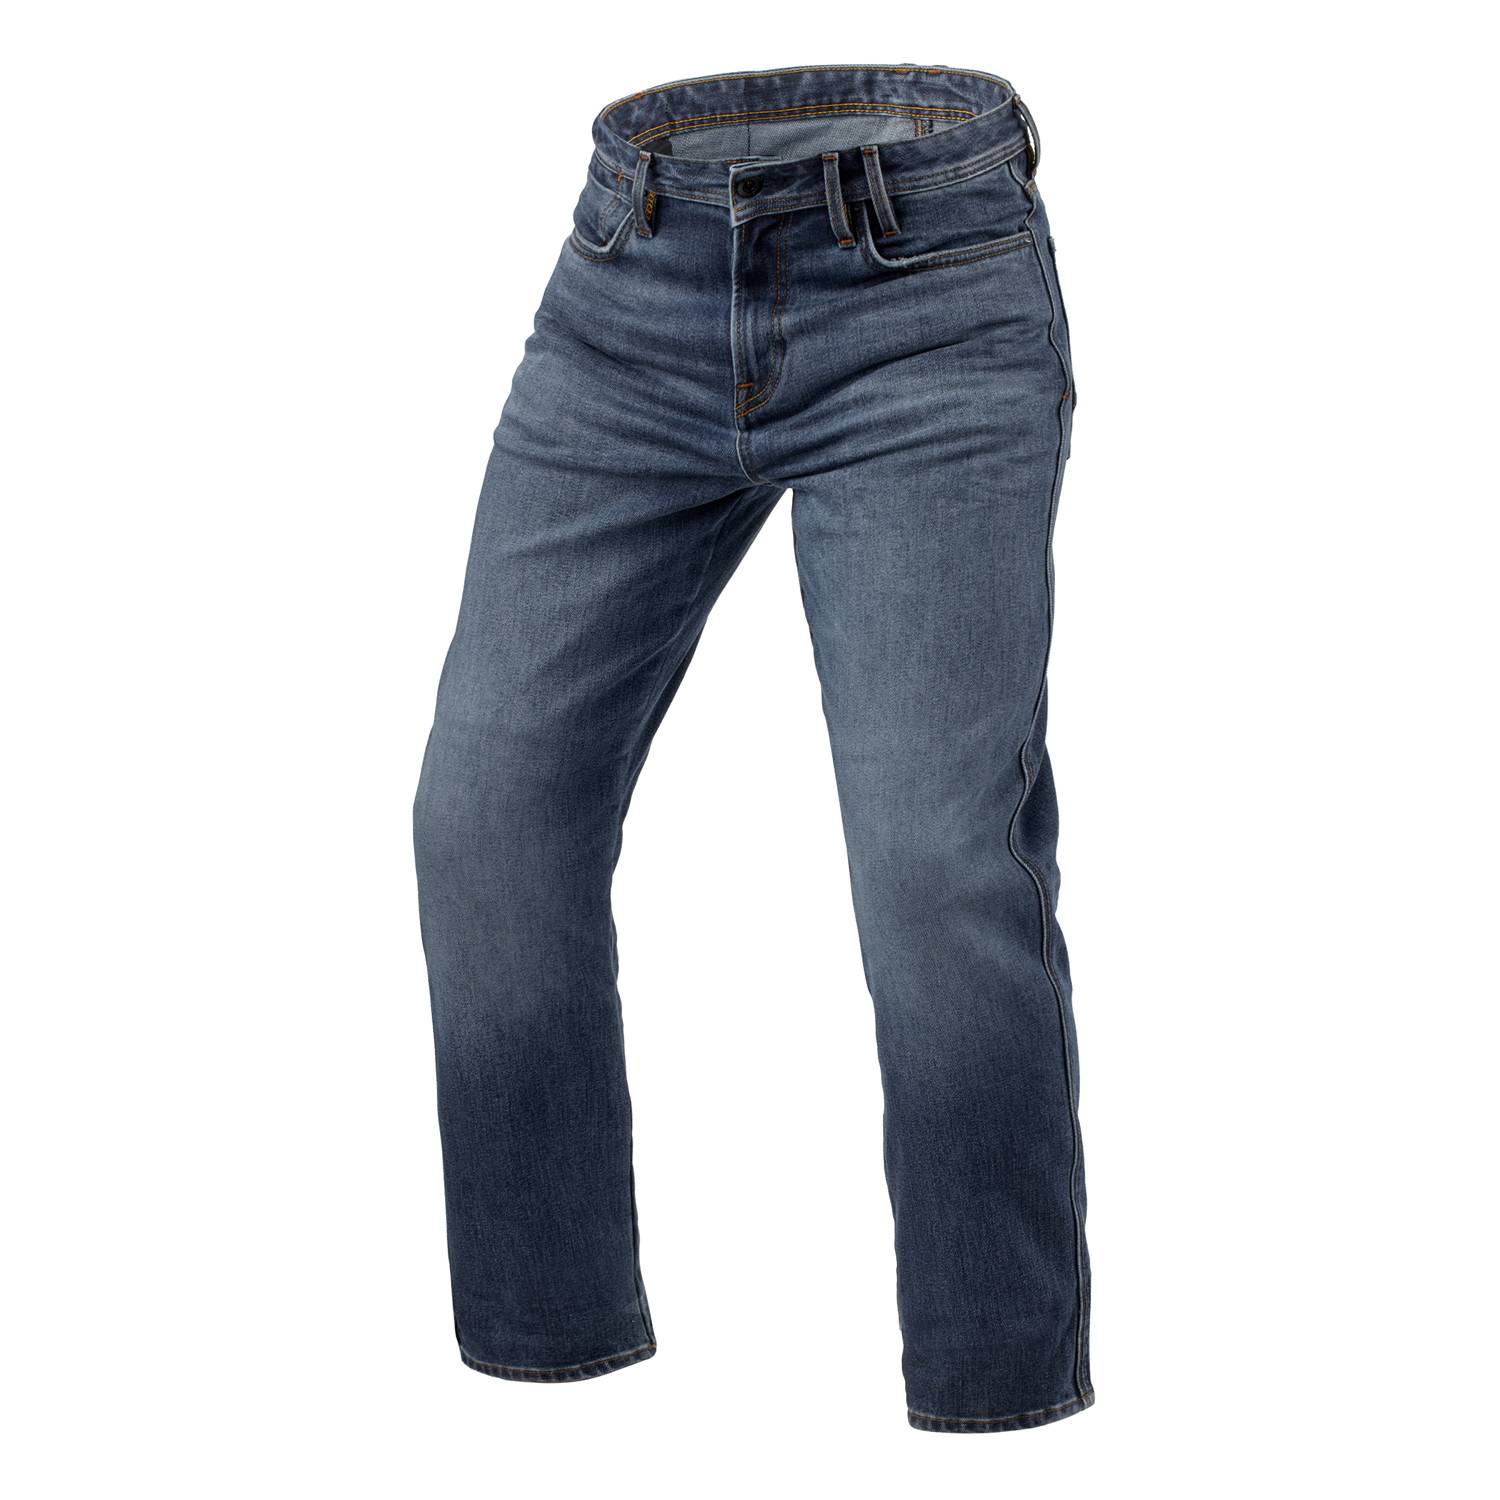 Image of REV'IT! Jeans Lombard 3 RF Mid Blue Stone L32 Motorcycle Jeans Size L32/W28 ID 8700001376013